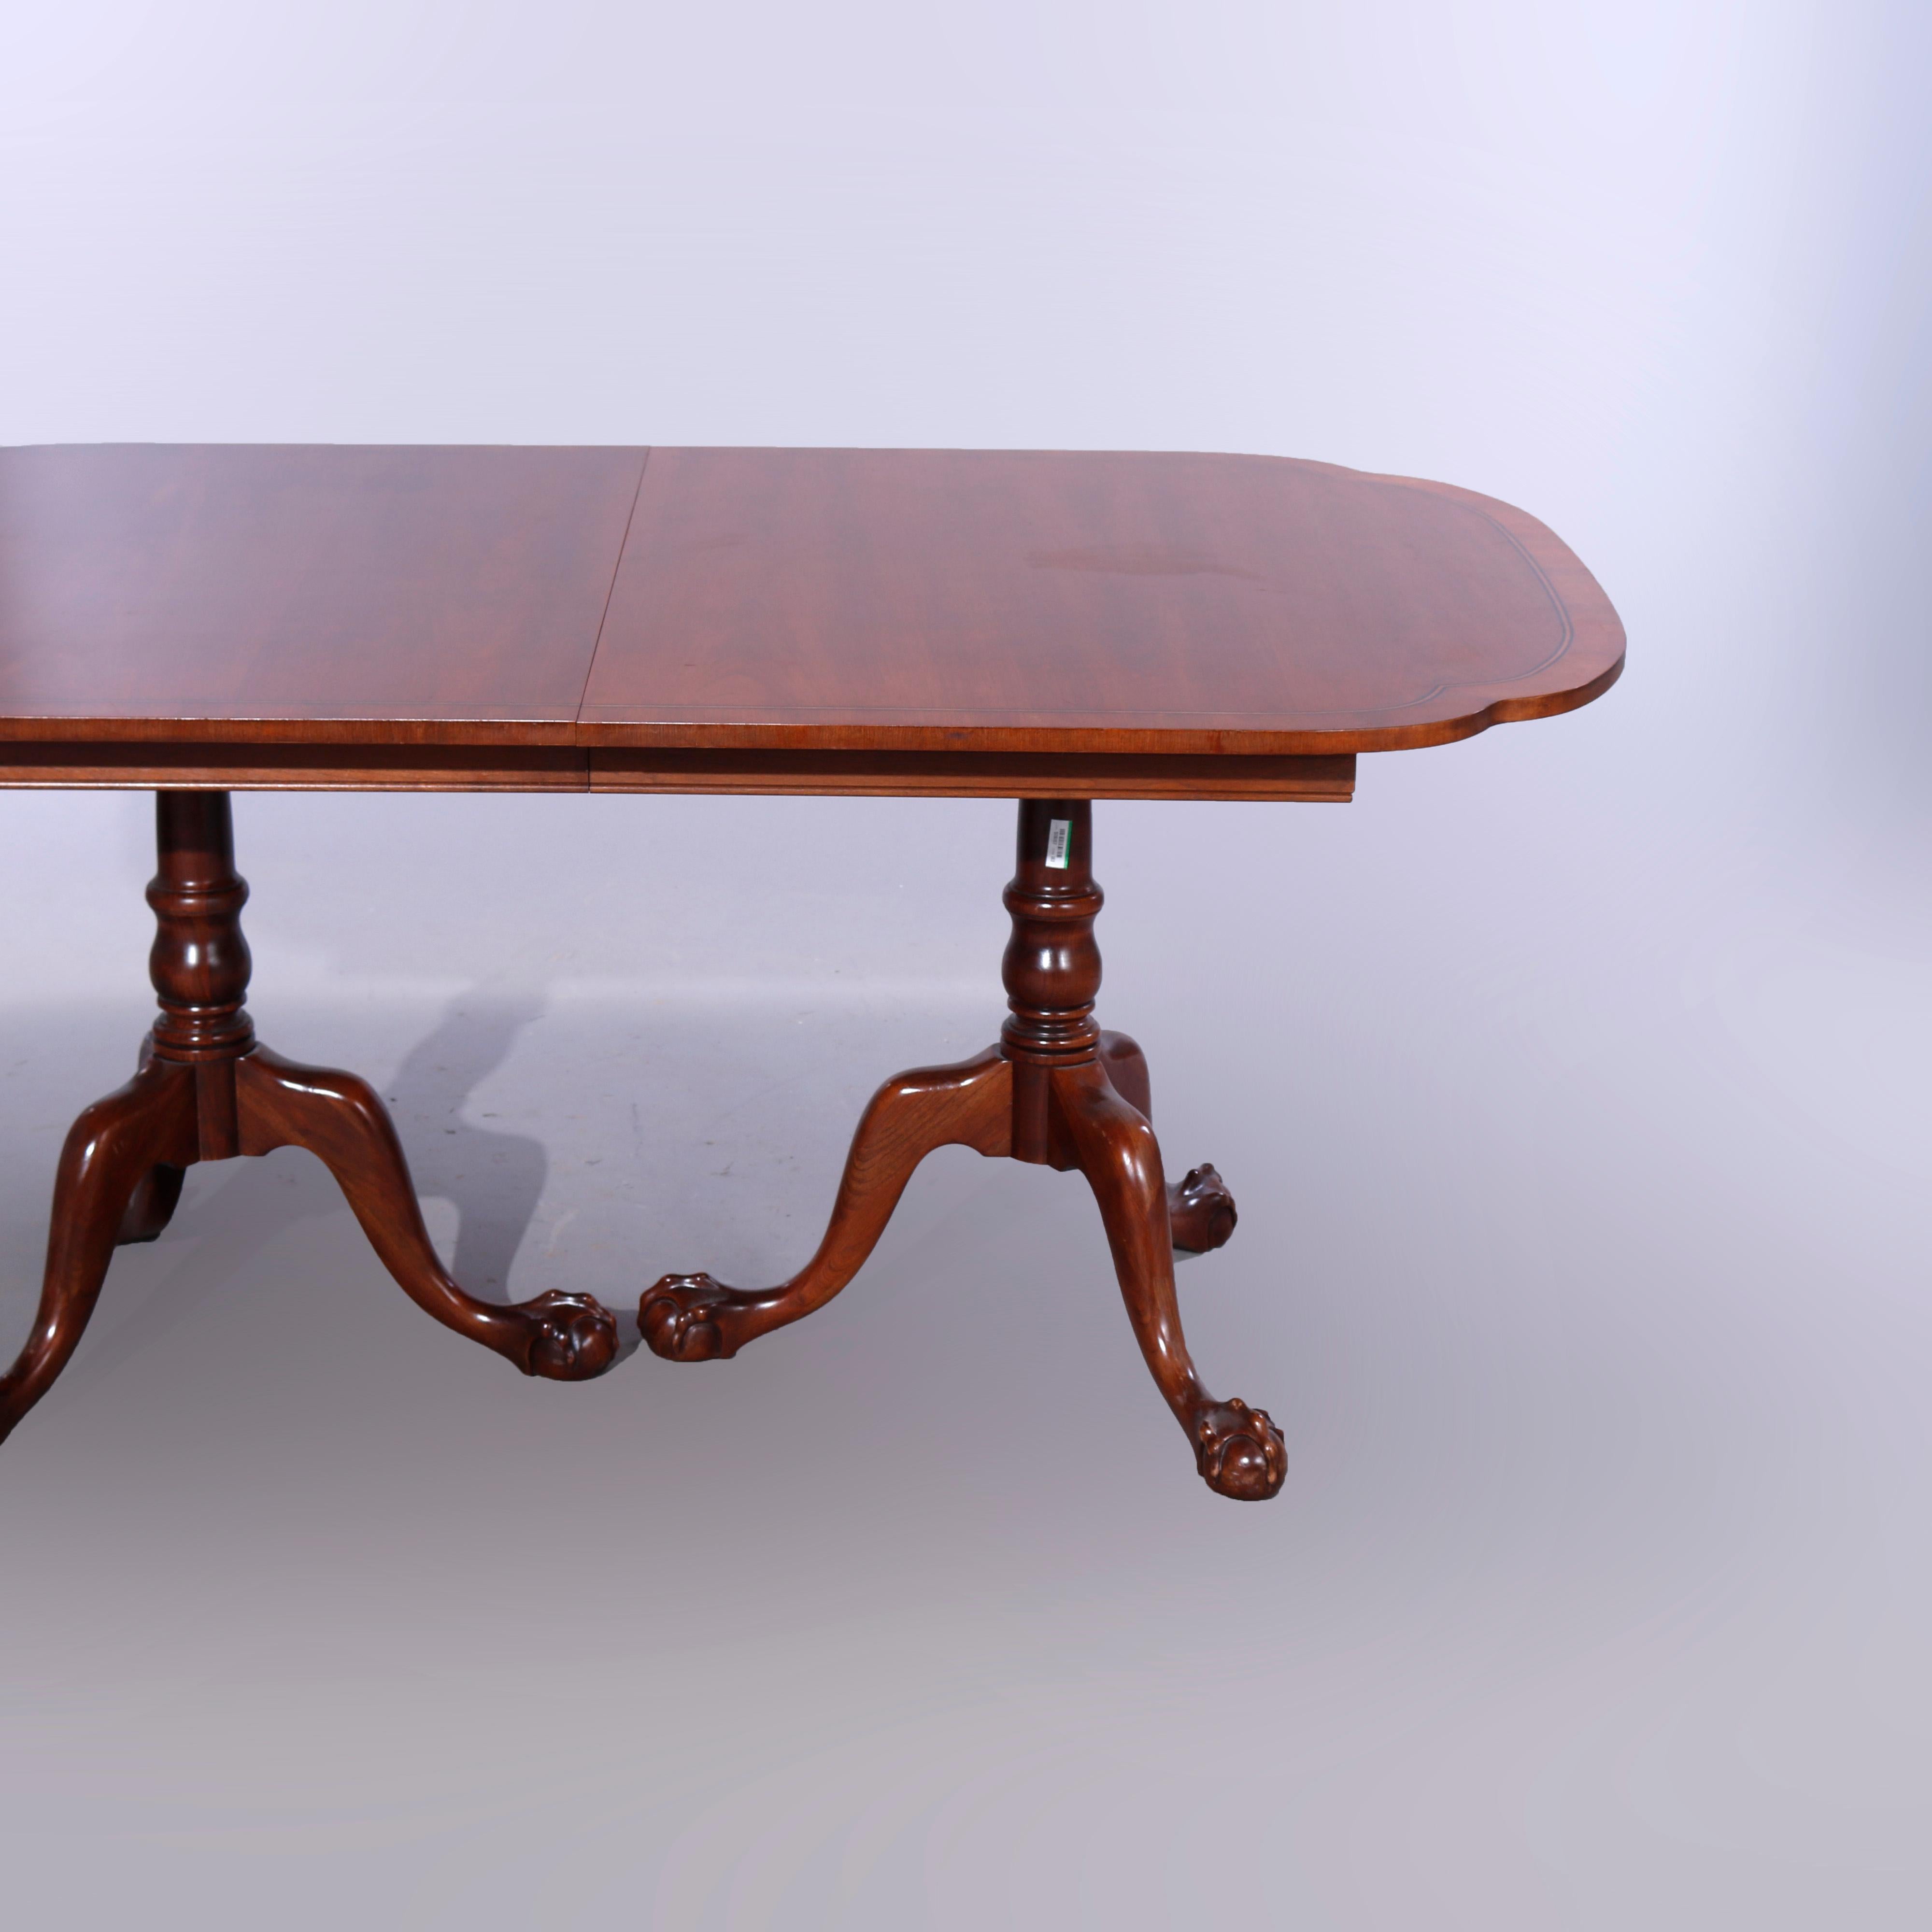 Antique Mahogany Chippendale Style Claw Foot Dining Table & Three Leaves c1930 1